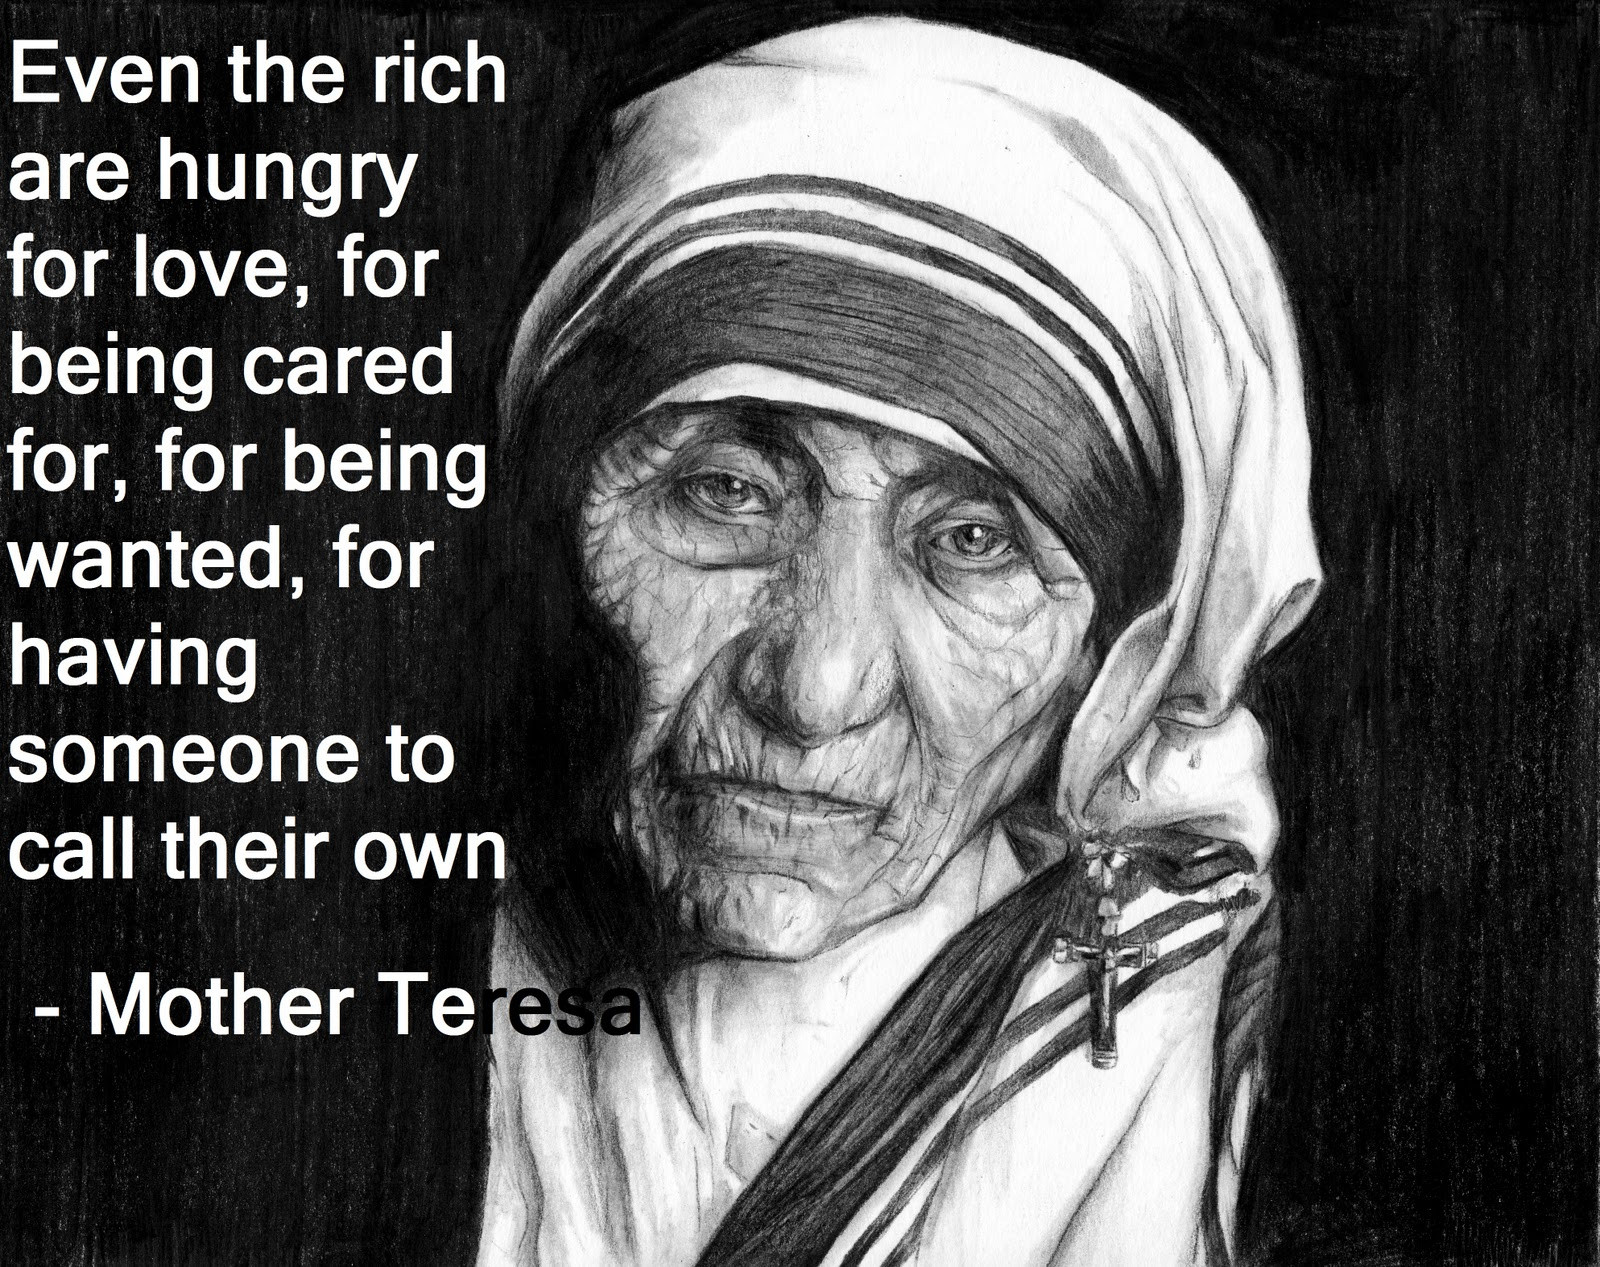 Mother Theresa Quote
 25 Famous Mother Teresa Quotes – Themes pany – Design